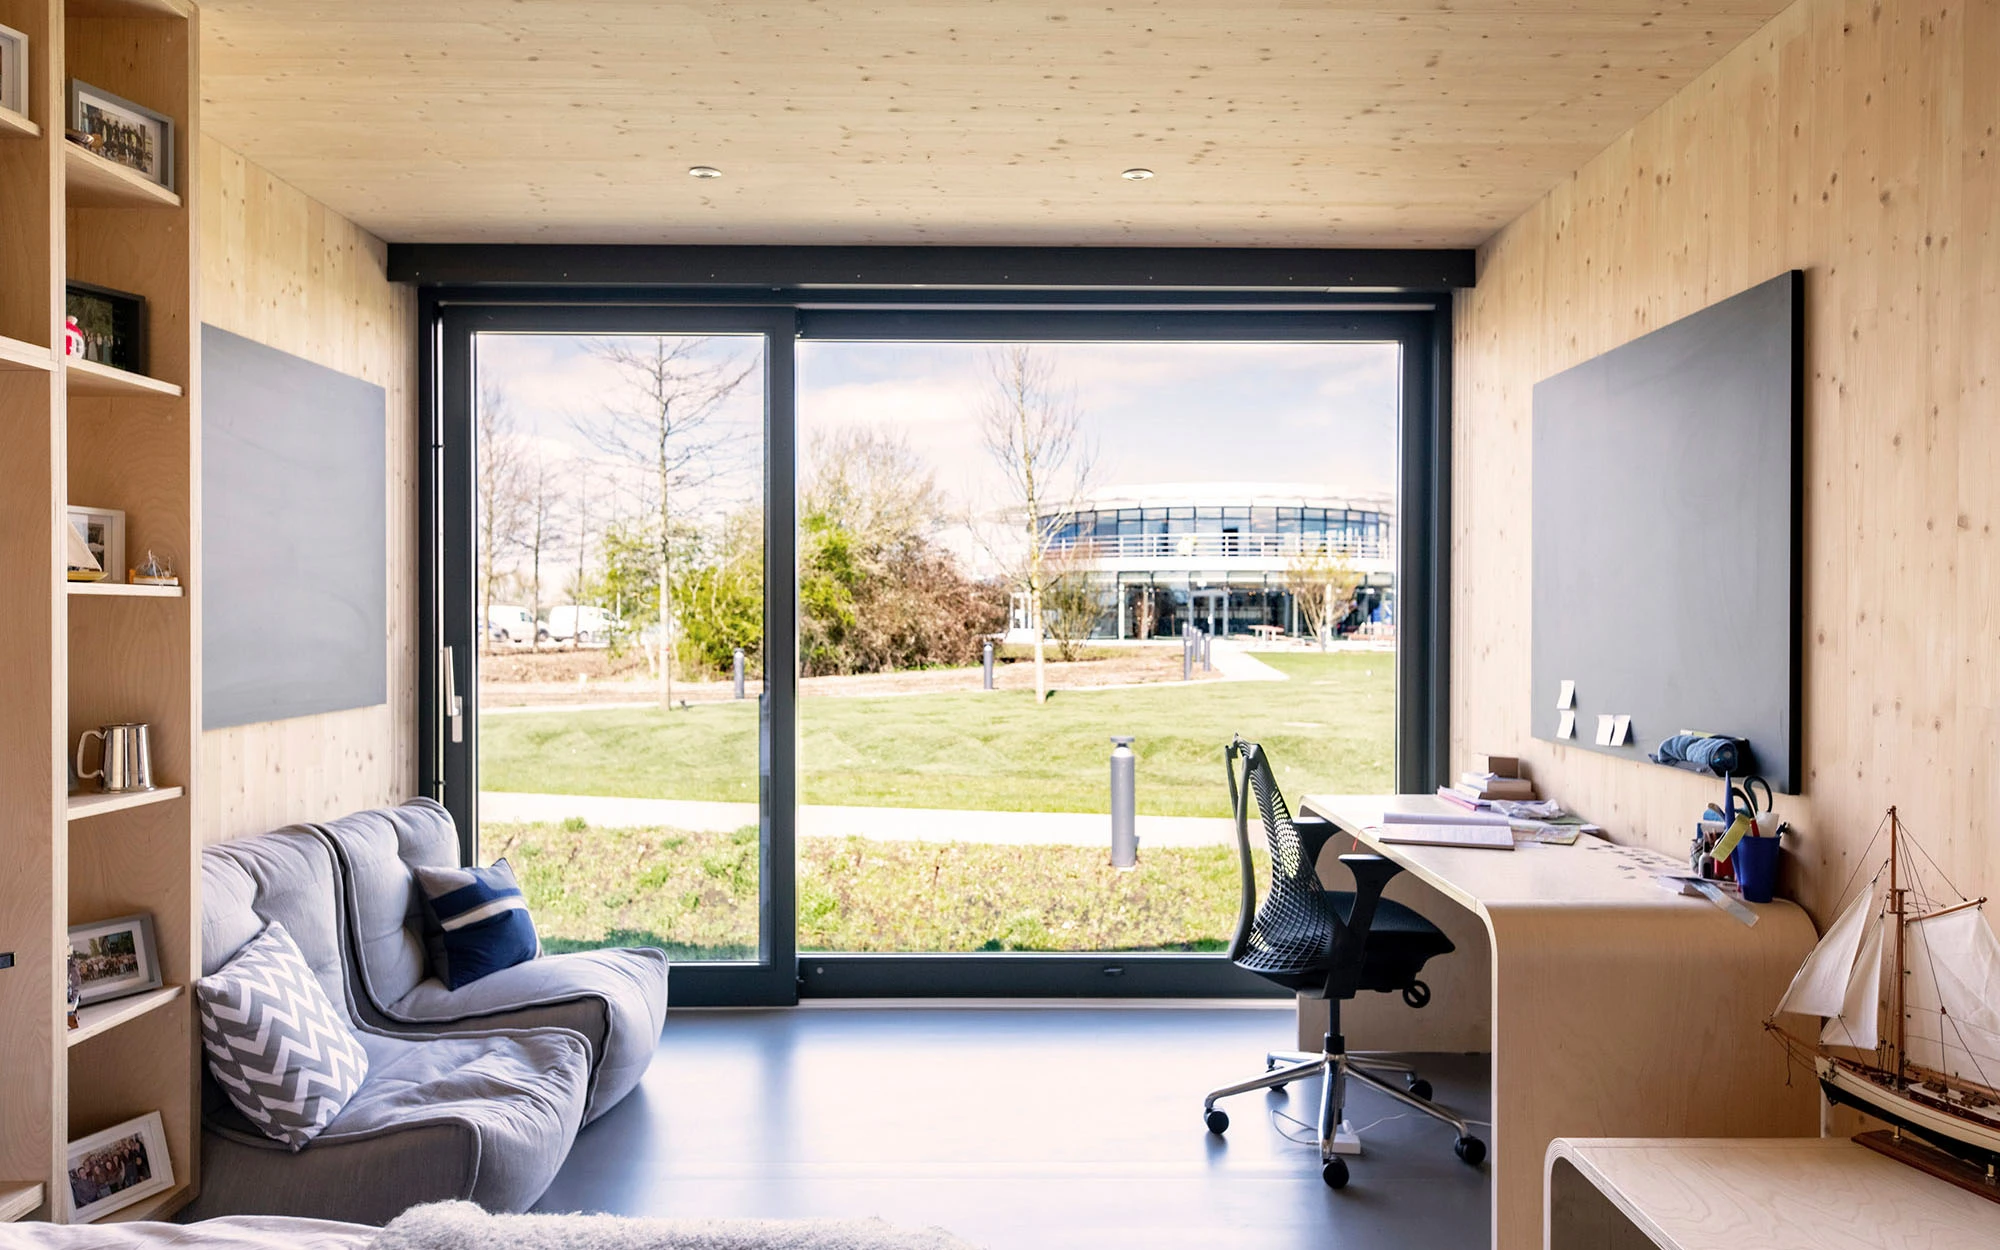 Interior residential units at the Dyson Institute of Engineering and Technology